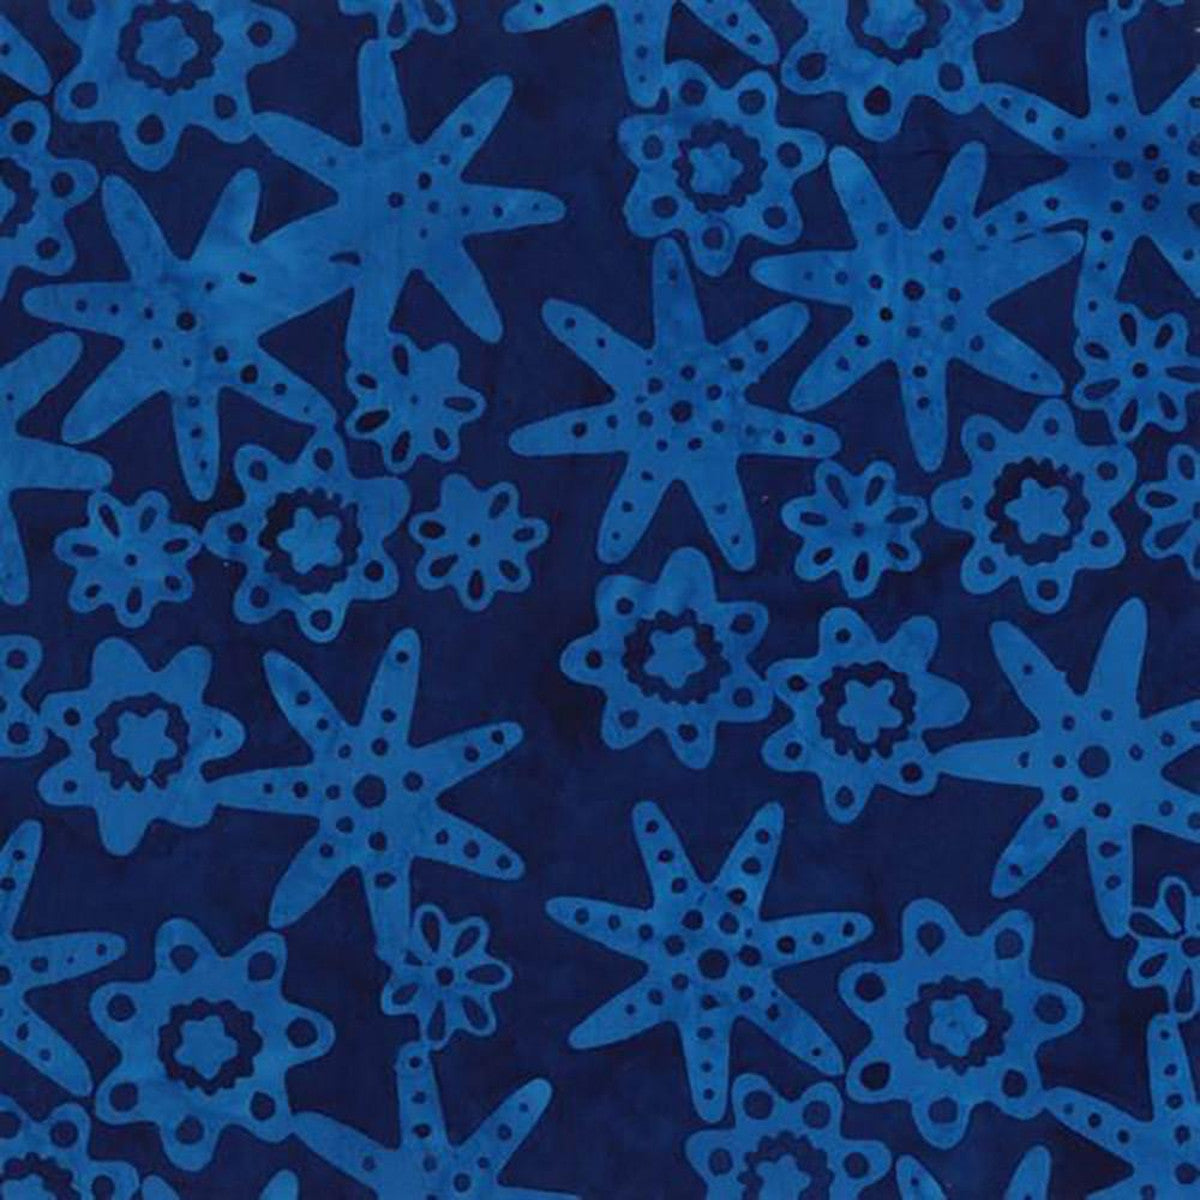 This batik is a rich navy with lighter blue starfish and flowers tossed all over. Great for quilting, crafting and clothing. From Anthology Fabrics By Jonge, Jacqueline De Midnight Jade Batik by Jacqueline de Jonge Collection In Batiks